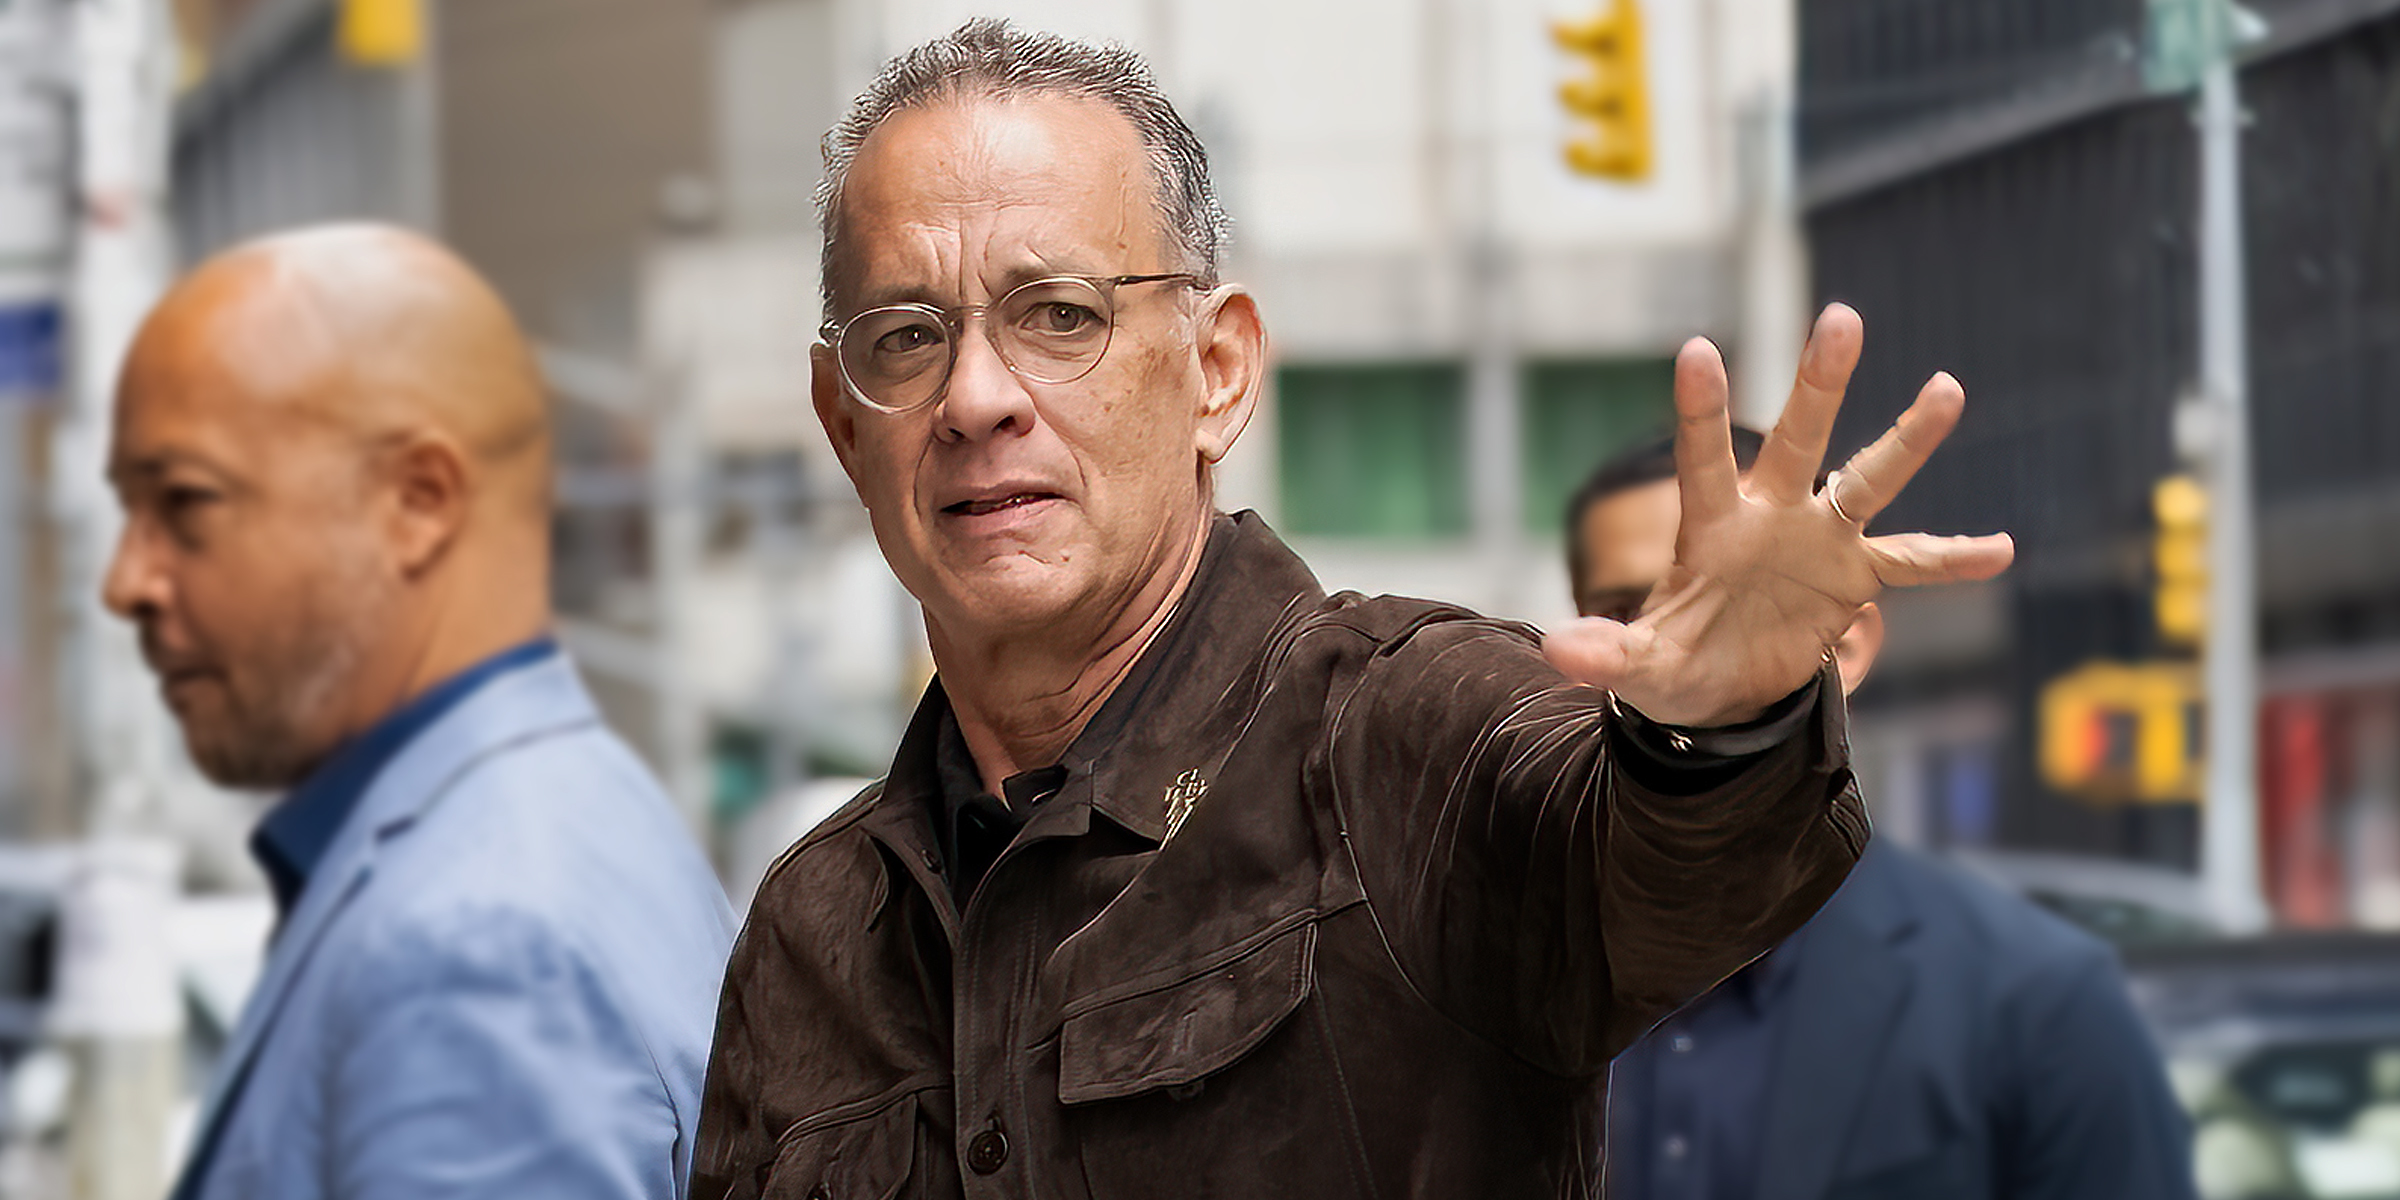 Tom Hanks | Source : Getty Images